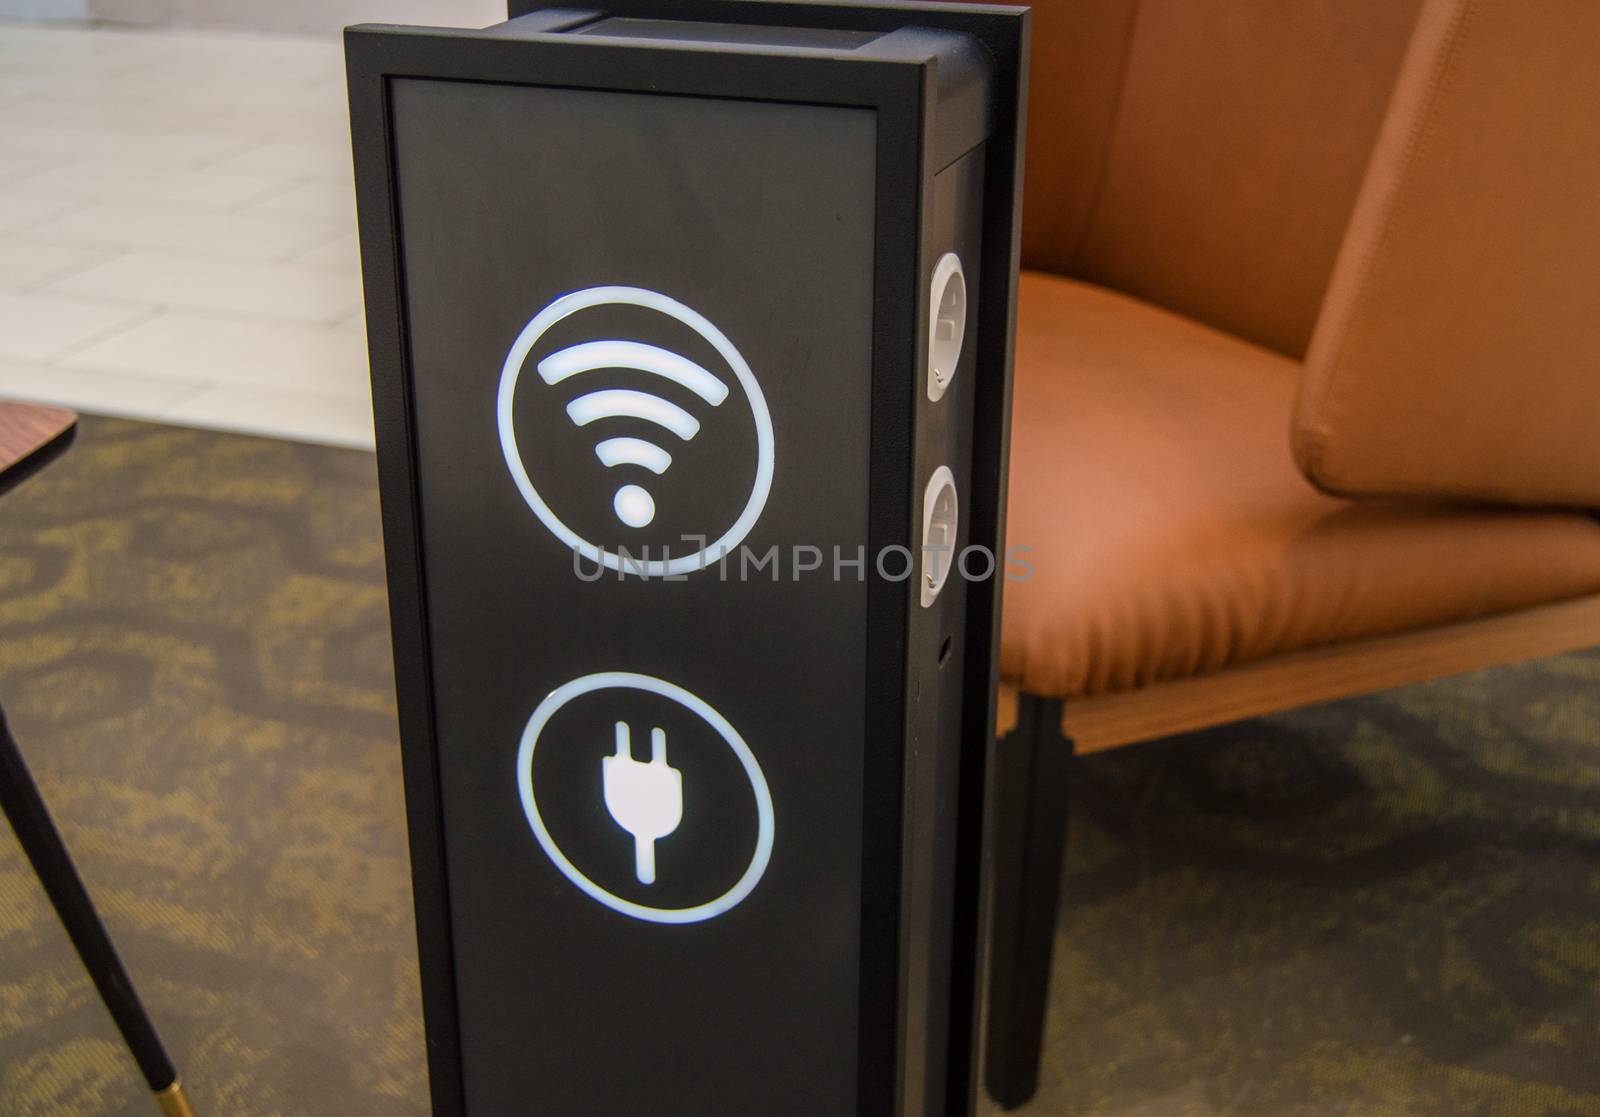 Stand tower for charging mobile phones in a shopping center, the sign of a wifi zone, background rest areas and service, the concept of the care experience and service.